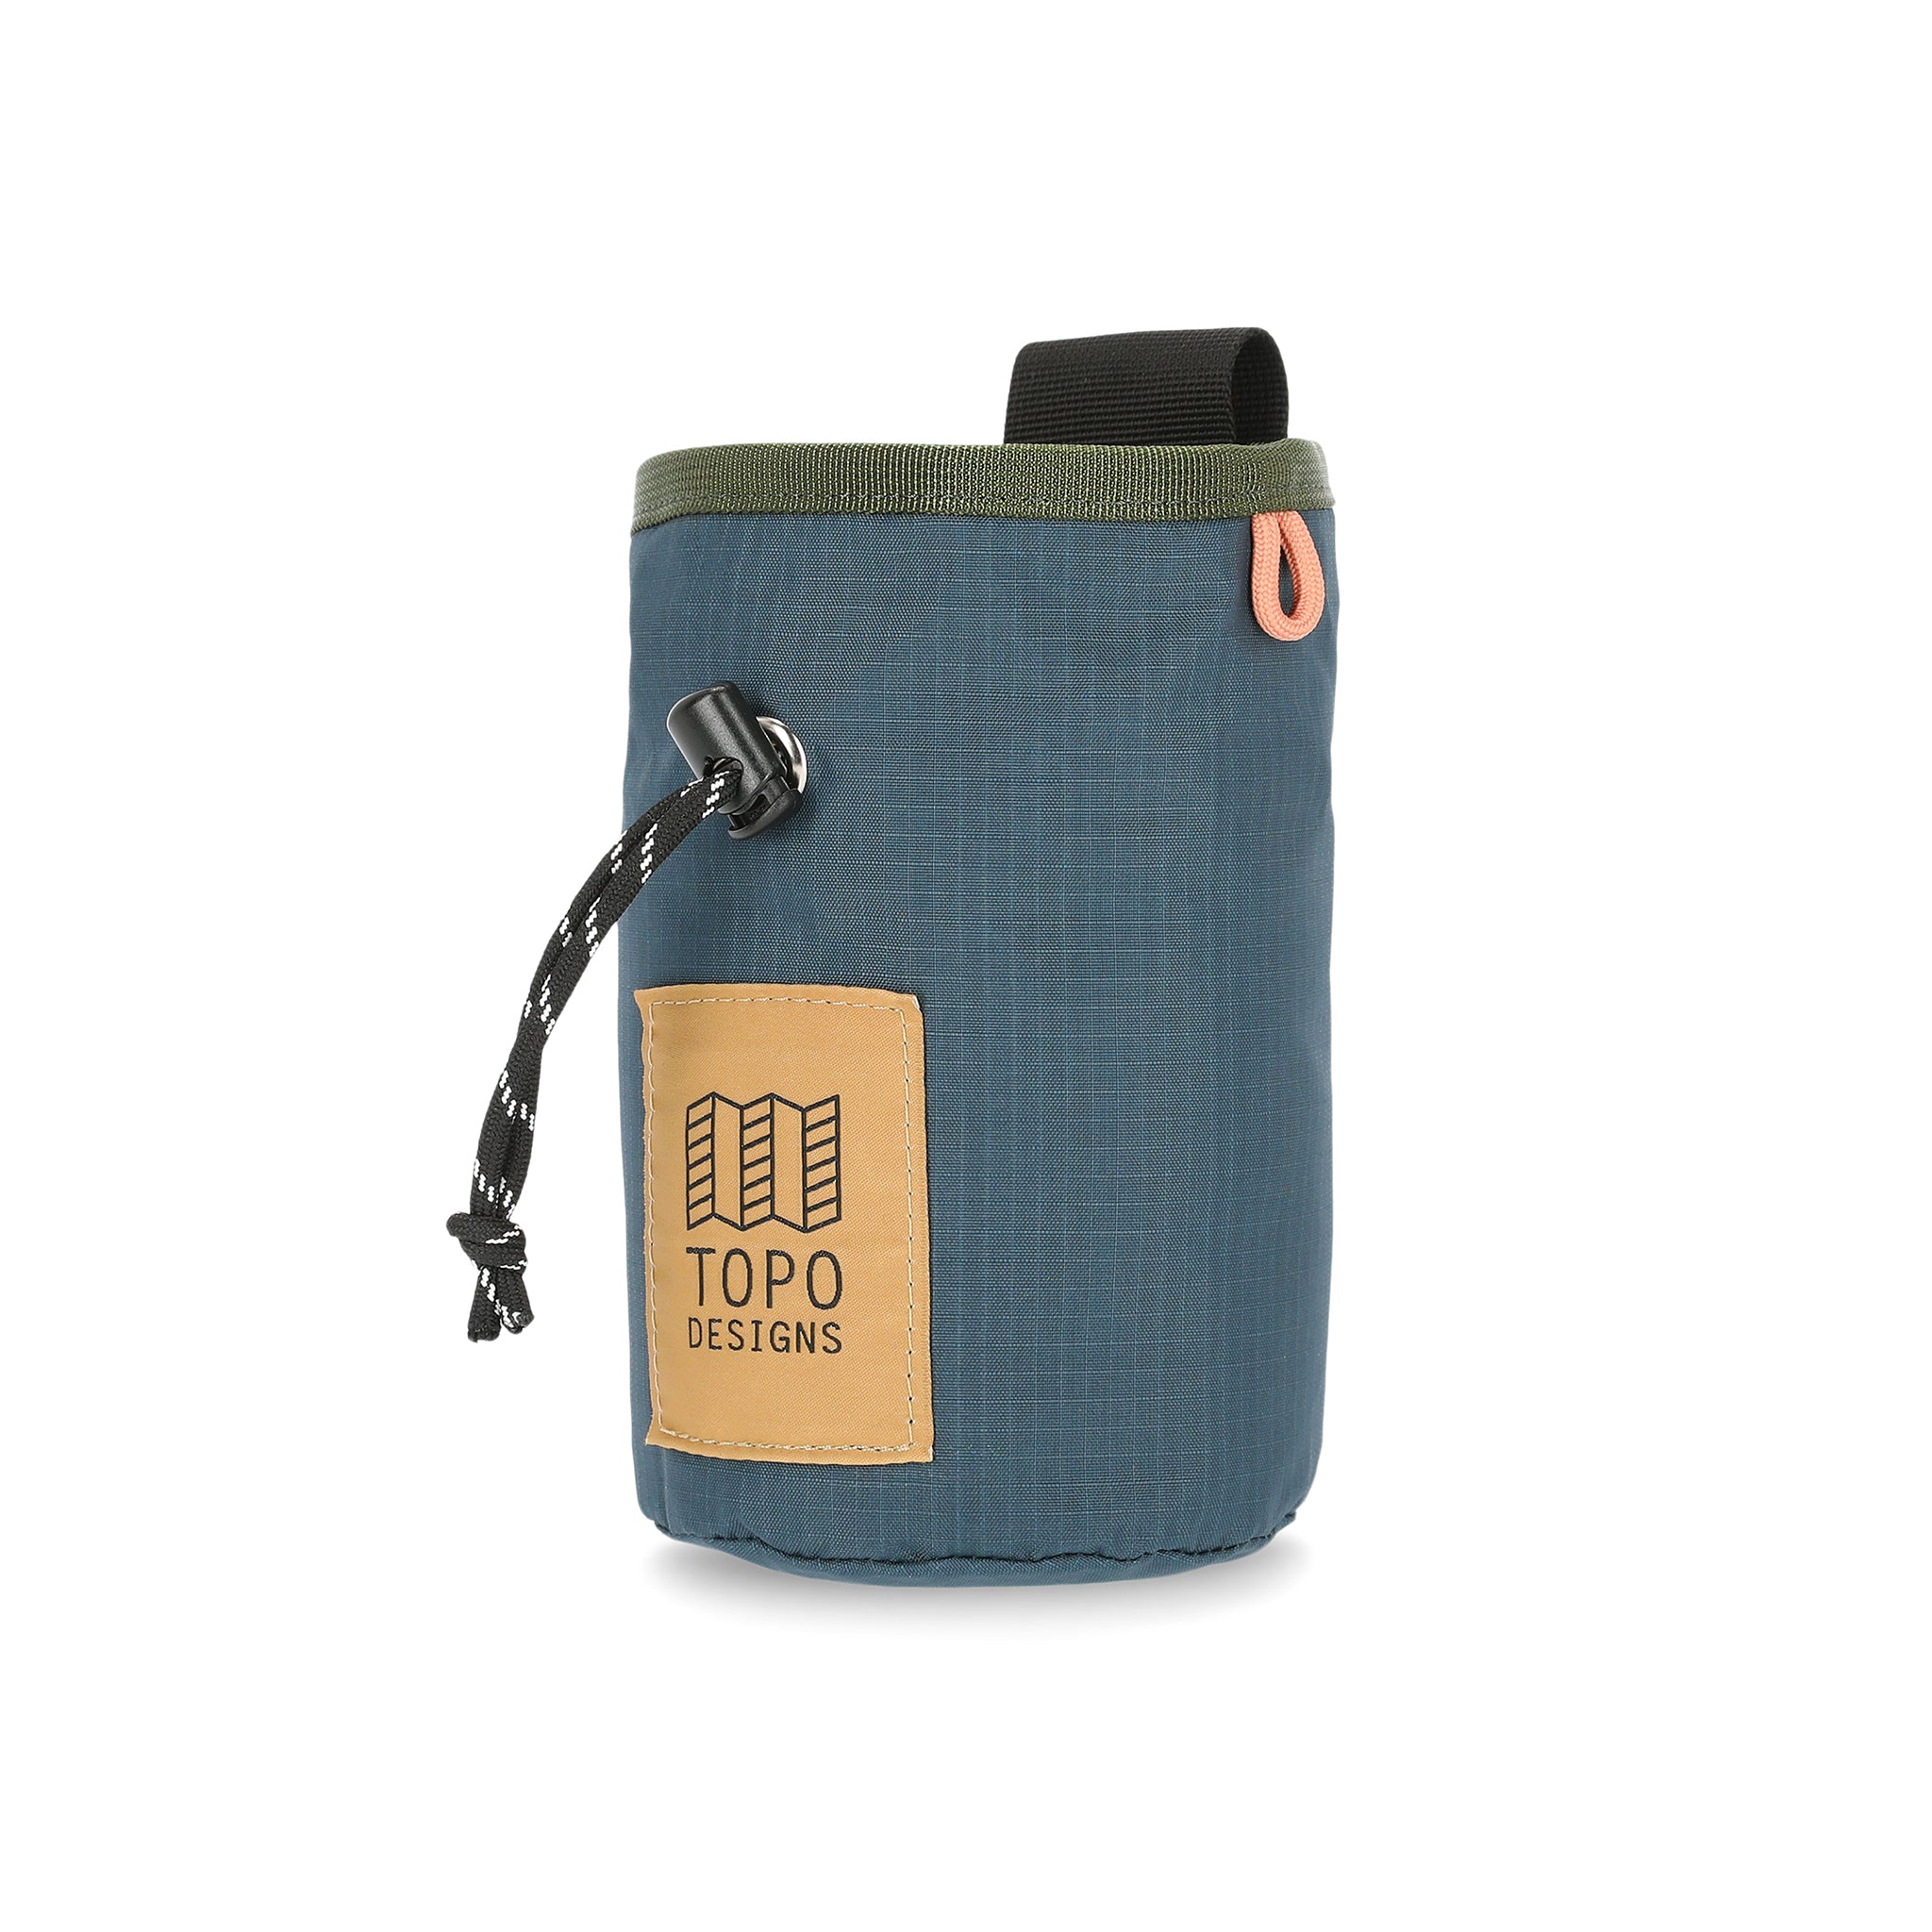 Topo Designs Chalk Bag | Built for Rock Climbers with Style